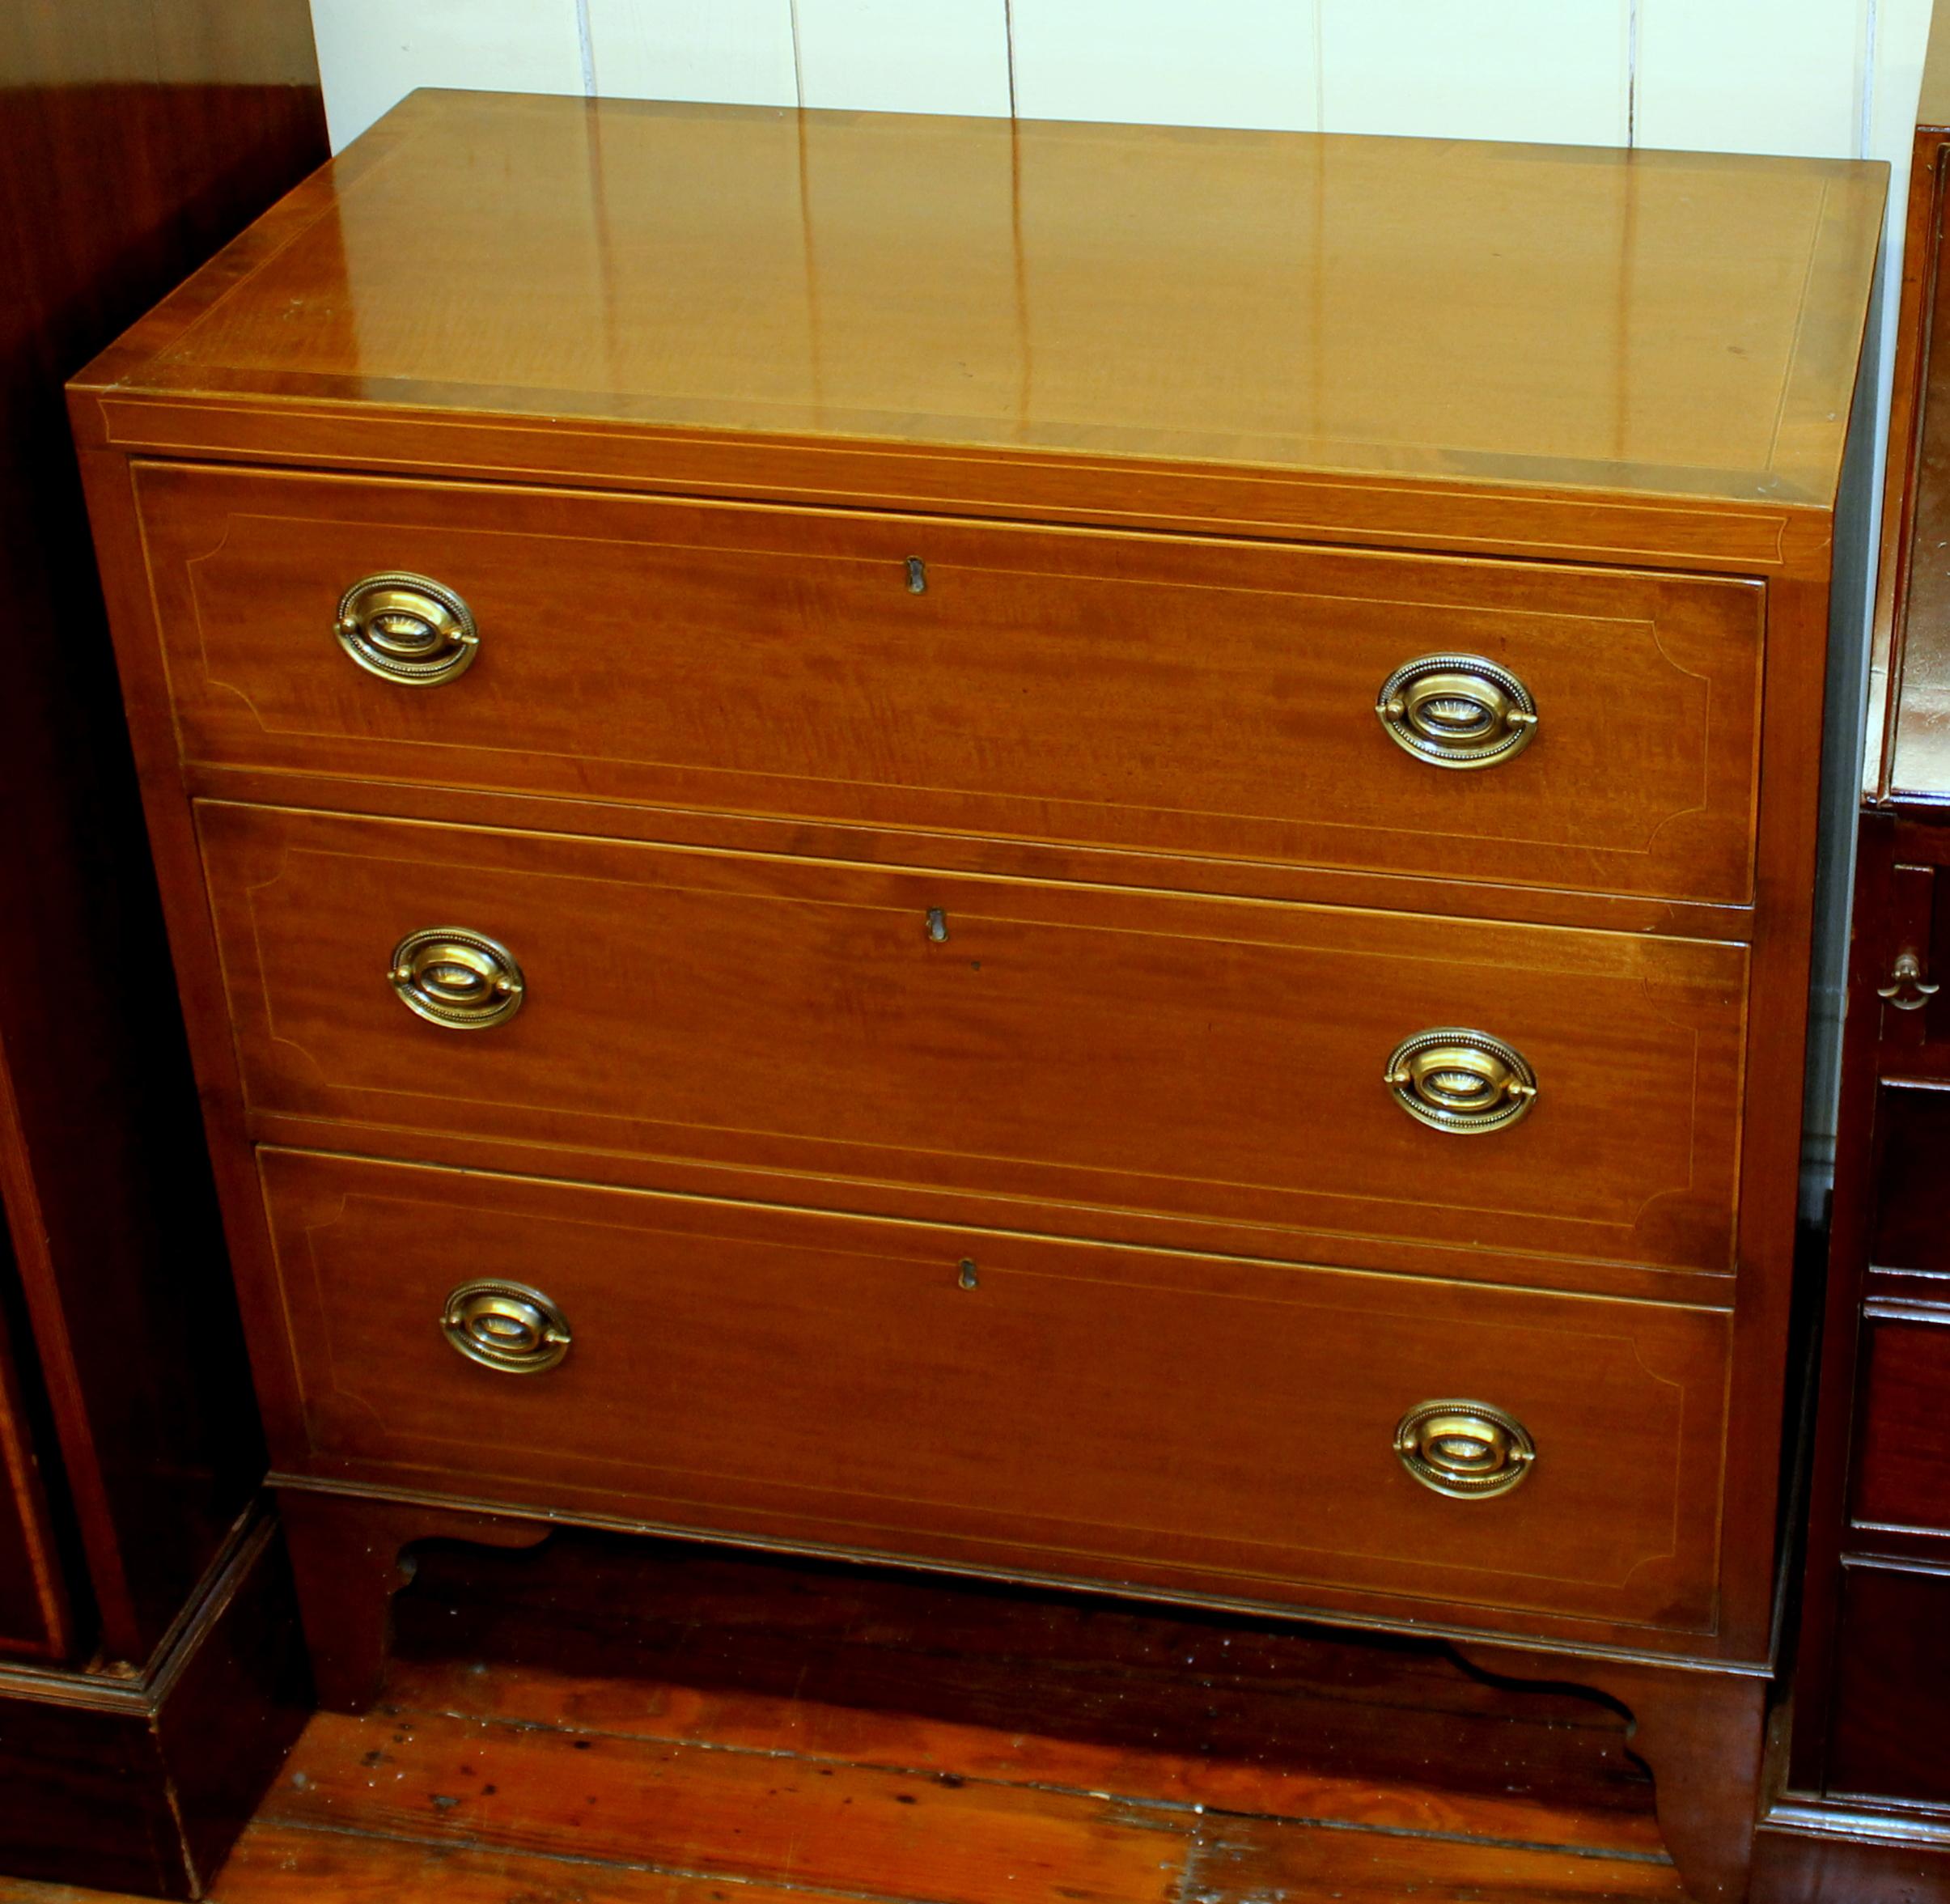 Very fine antique English inlaid mahogany three-drawer chest in a very desirable size and a very desirable 